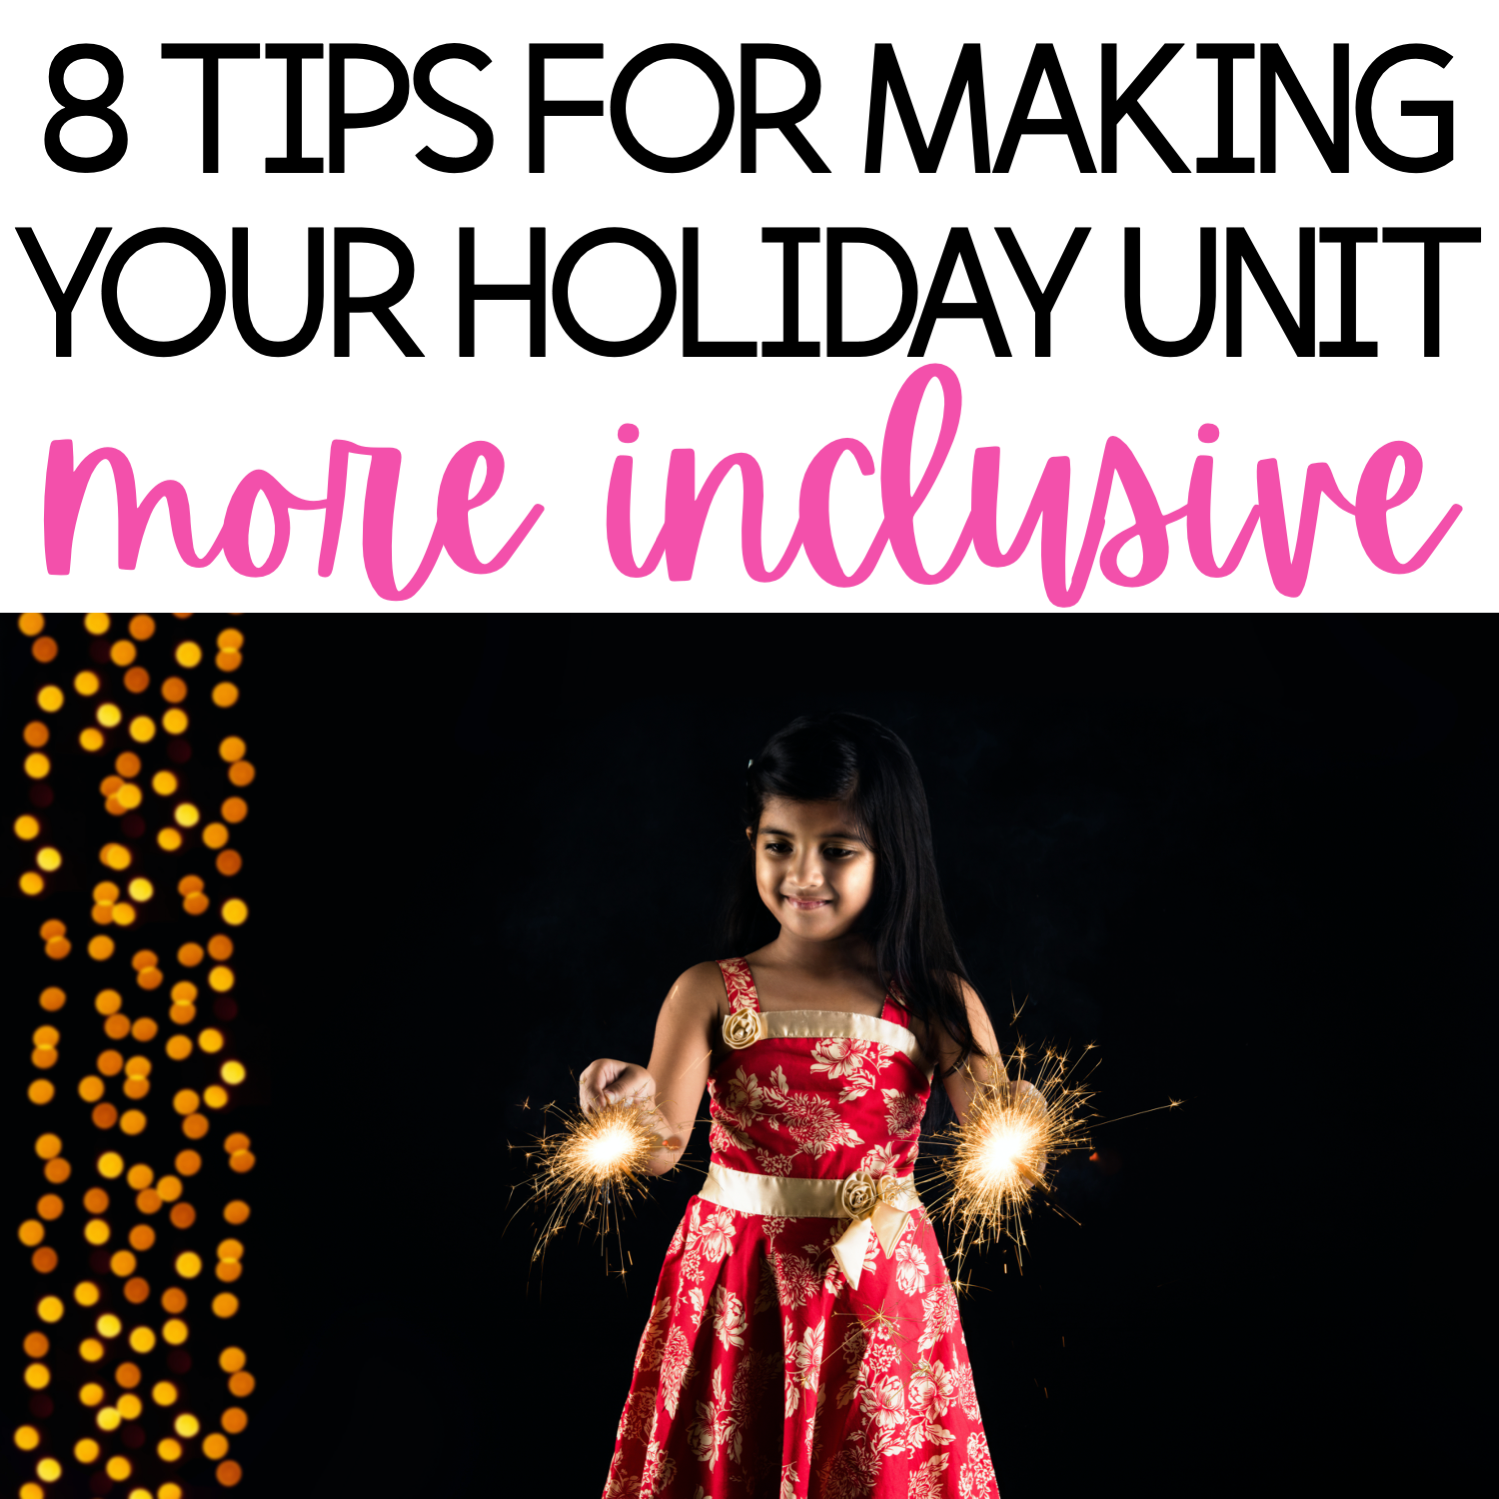 8 ways to make your holidays around the world unit more inclusive. 8 things to think about during your holiday lesson plans and holiday unit.